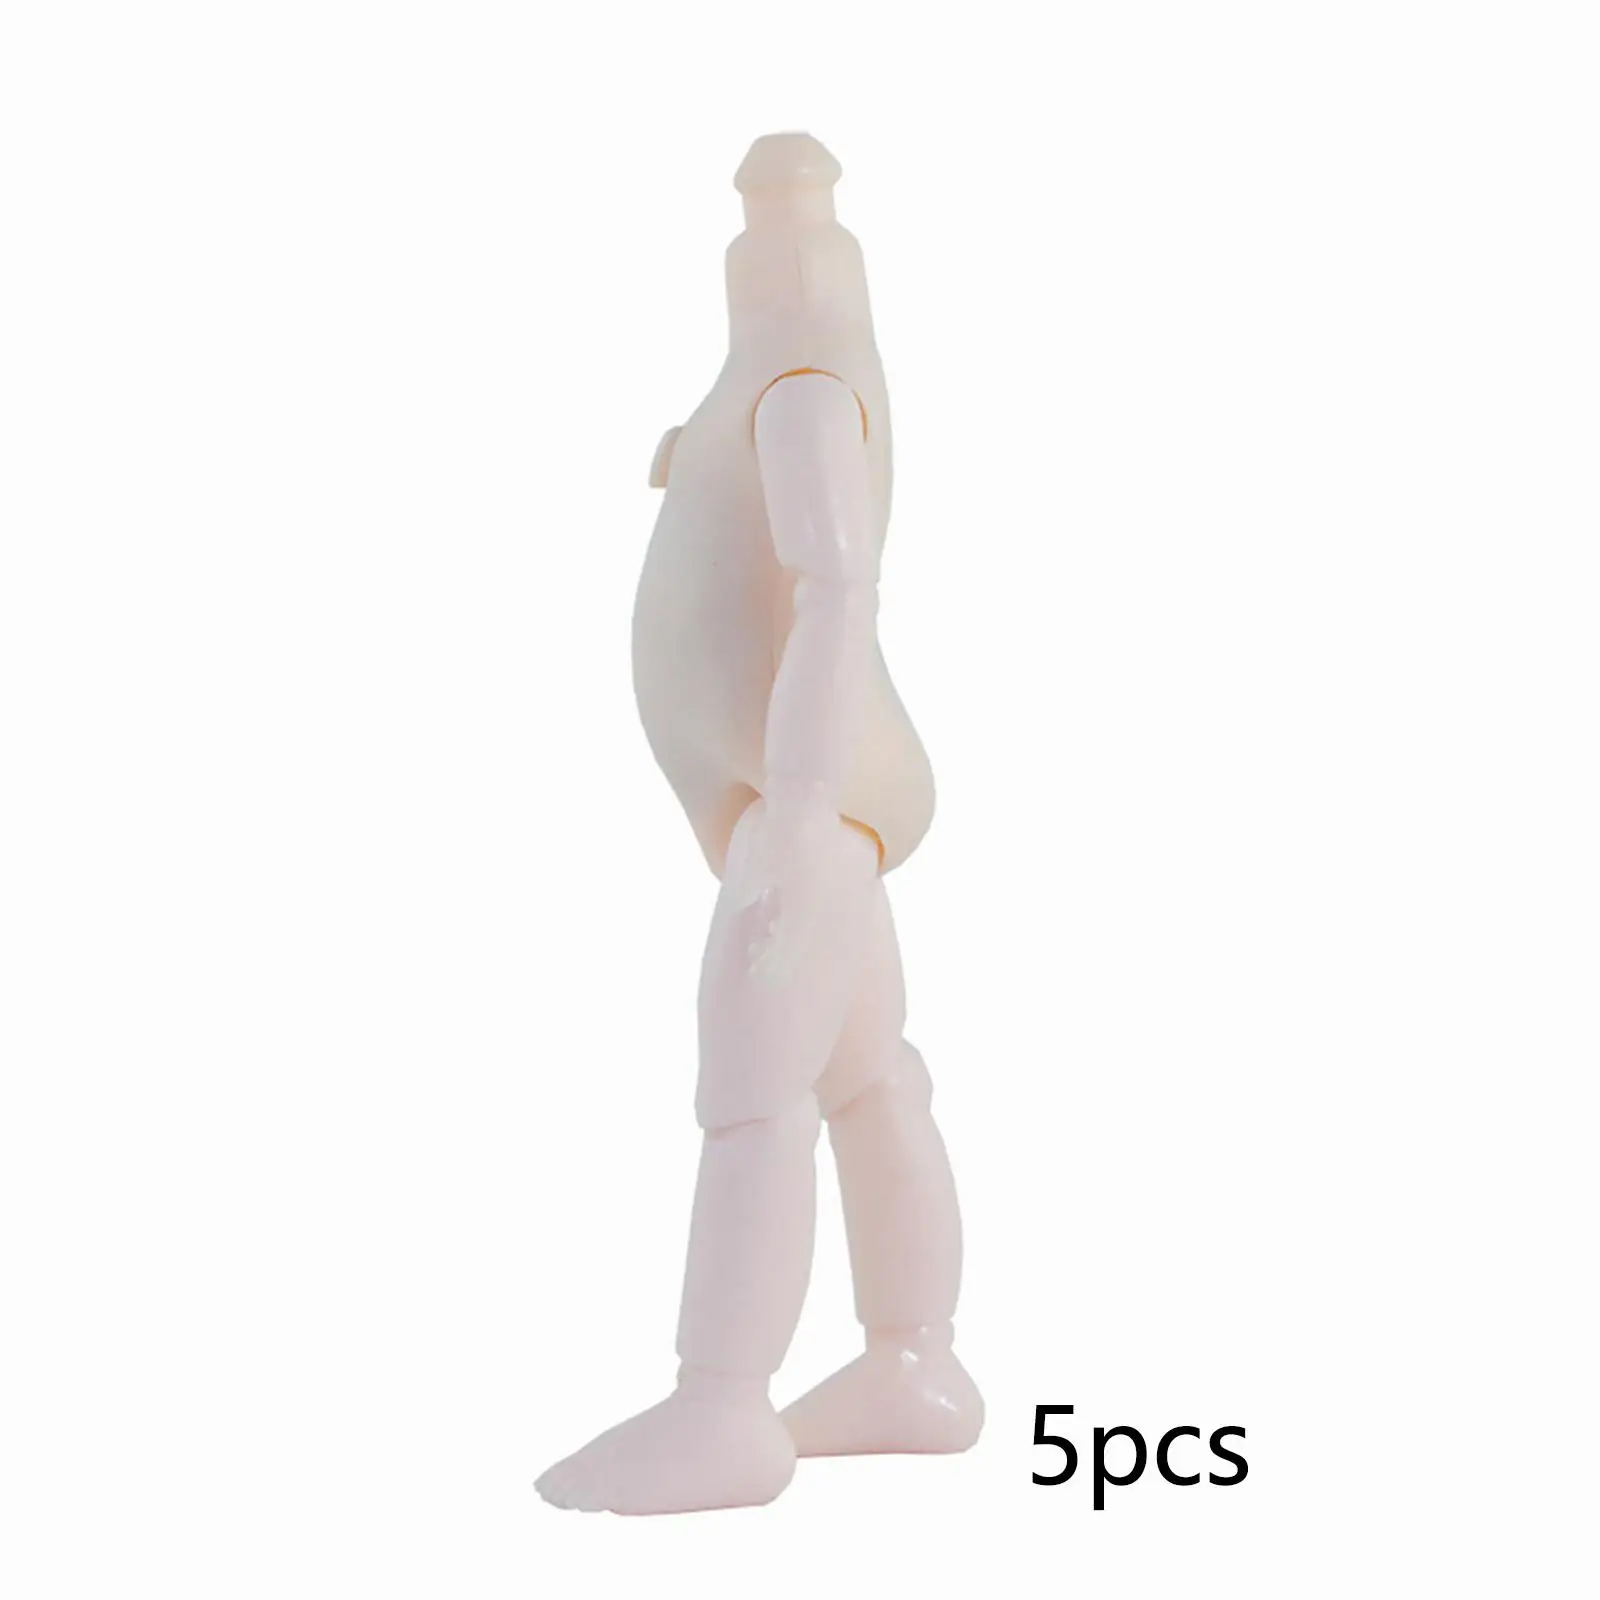 5 Pieces Doll Nude Body Height 16cm Moveable Jointed Making Accessory Gifts Excellent Workmanship